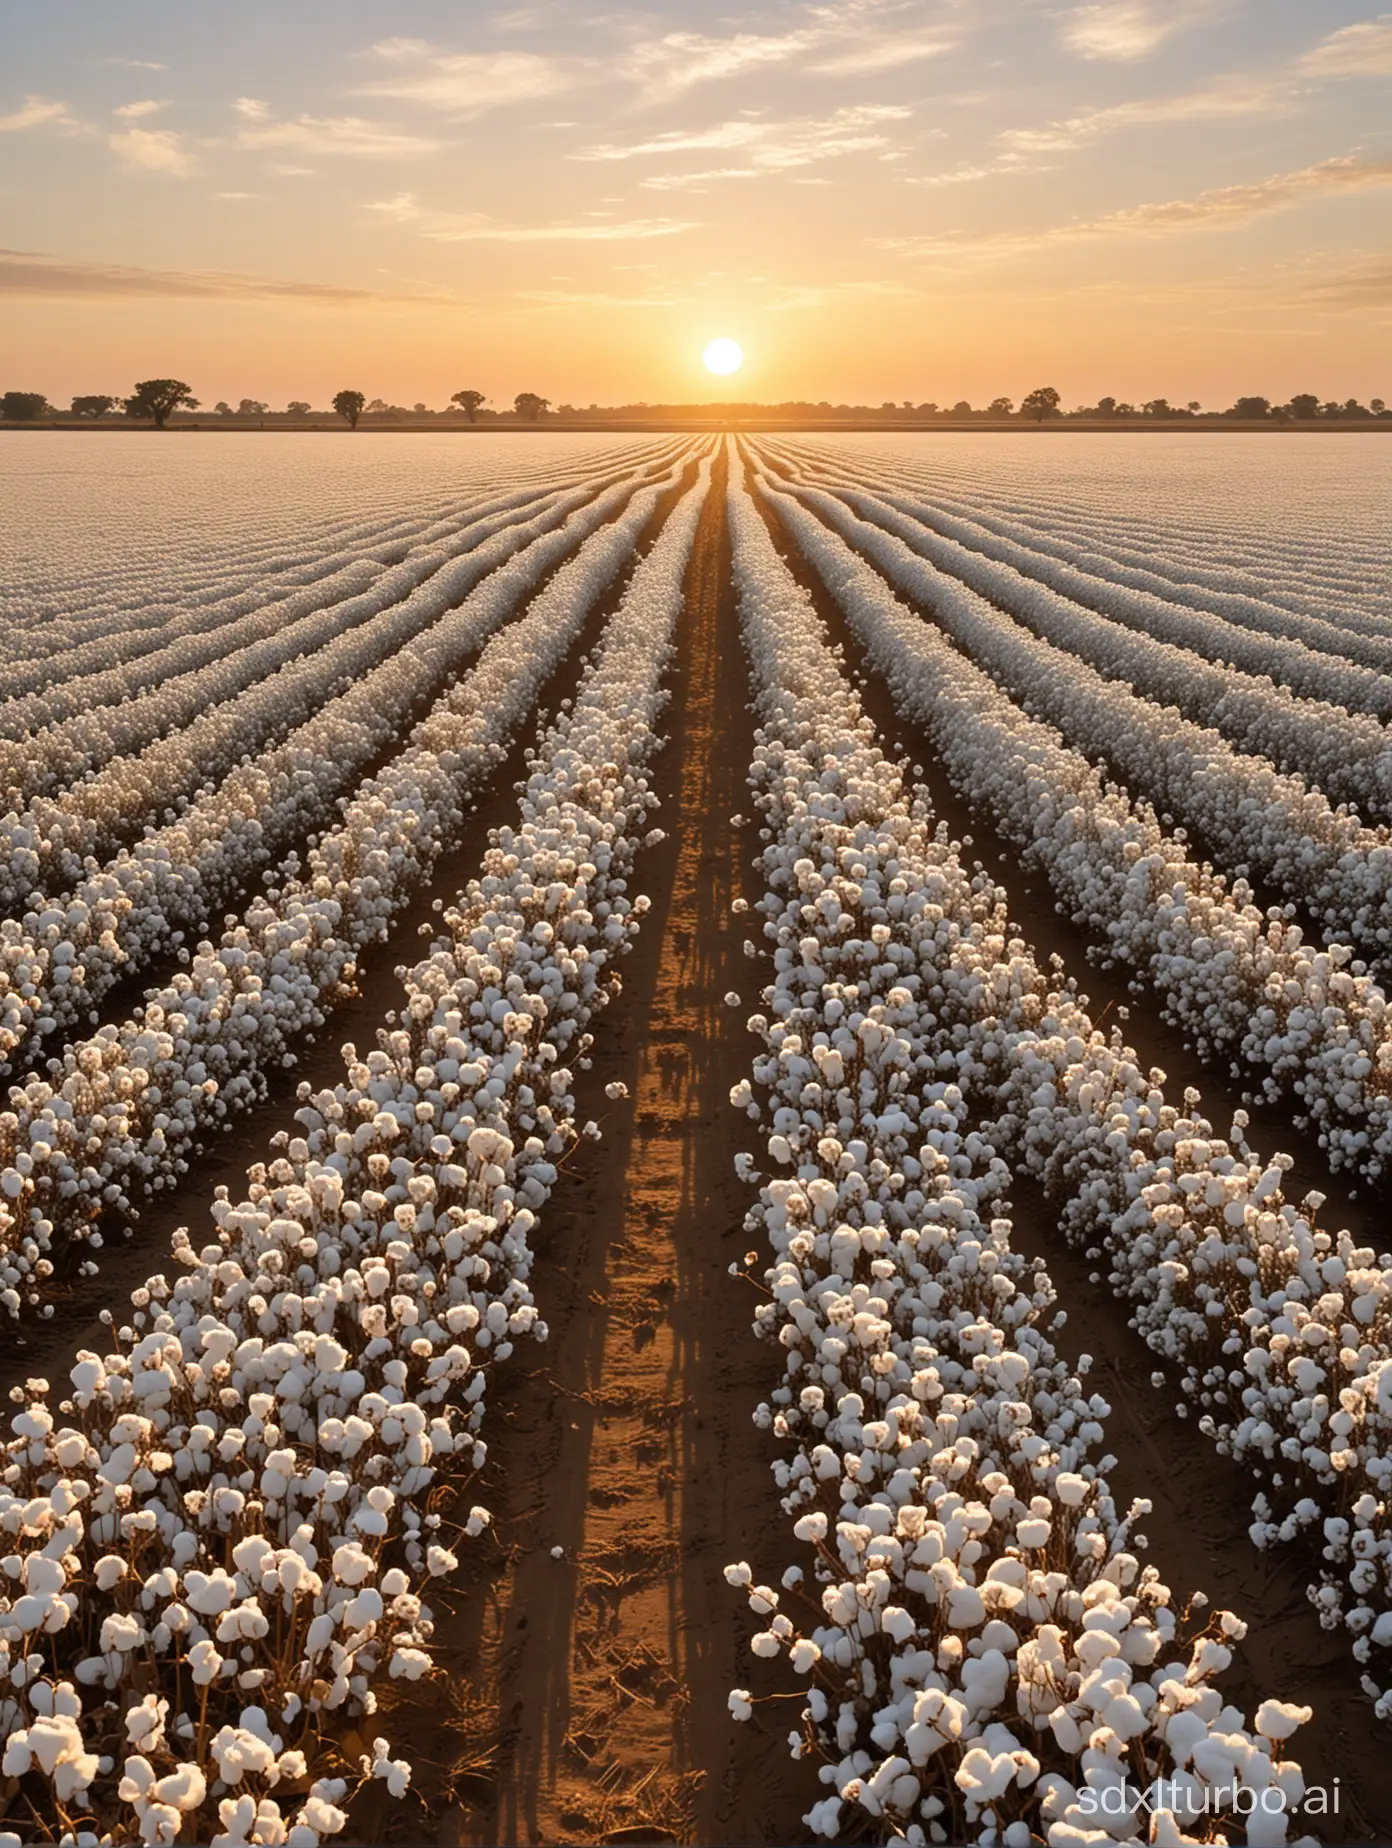 Visualize a scene of cotton harvesting where a vast field stretches out, with endless rows of white plants disappearing into the horizon. The setting sun gently gilds the soft plumes, creating a visual spectacle of serene and tranquil beauty. Each cotton plant stands tall and proud, its fluffy white bolls swaying gently in the breeze. The distant horizon seems to beckon, inviting you to wander into the endless expanse of the field. As the golden light of sunset bathes the landscape, casting long shadows across the rows of cotton, a sense of peace washes over you, as if time itself has slowed down to savor the moment. It's a scene of simple yet profound beauty, reminiscent of the quiet majesty of rural landscapes captured by artists like Andrew Wyeth, who found inspiration in the simplicity of everyday life.